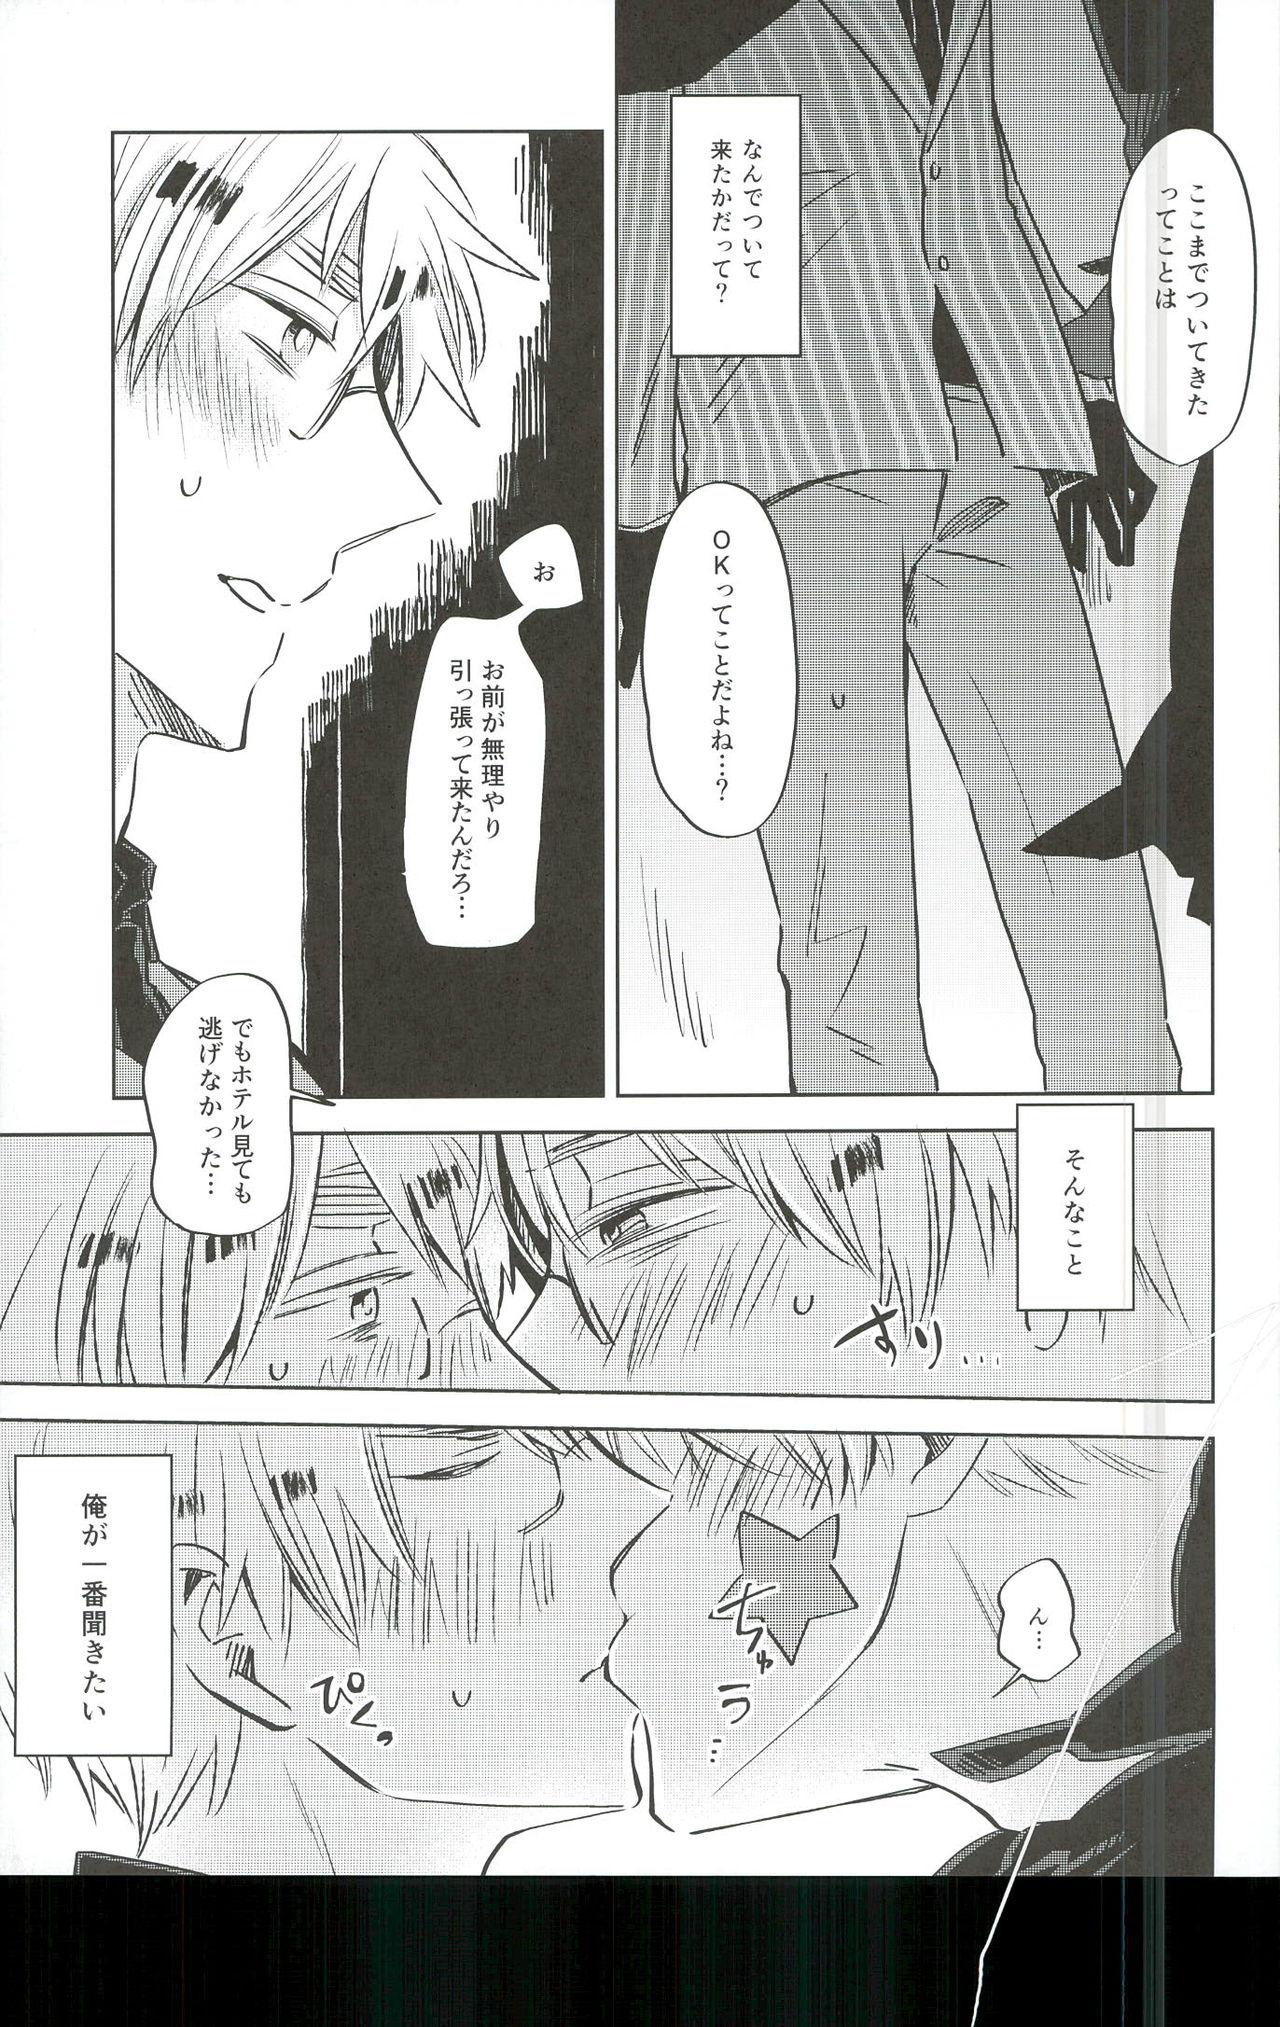 Swallow Ameagari no Slip Out - Axis powers hetalia Married - Page 4